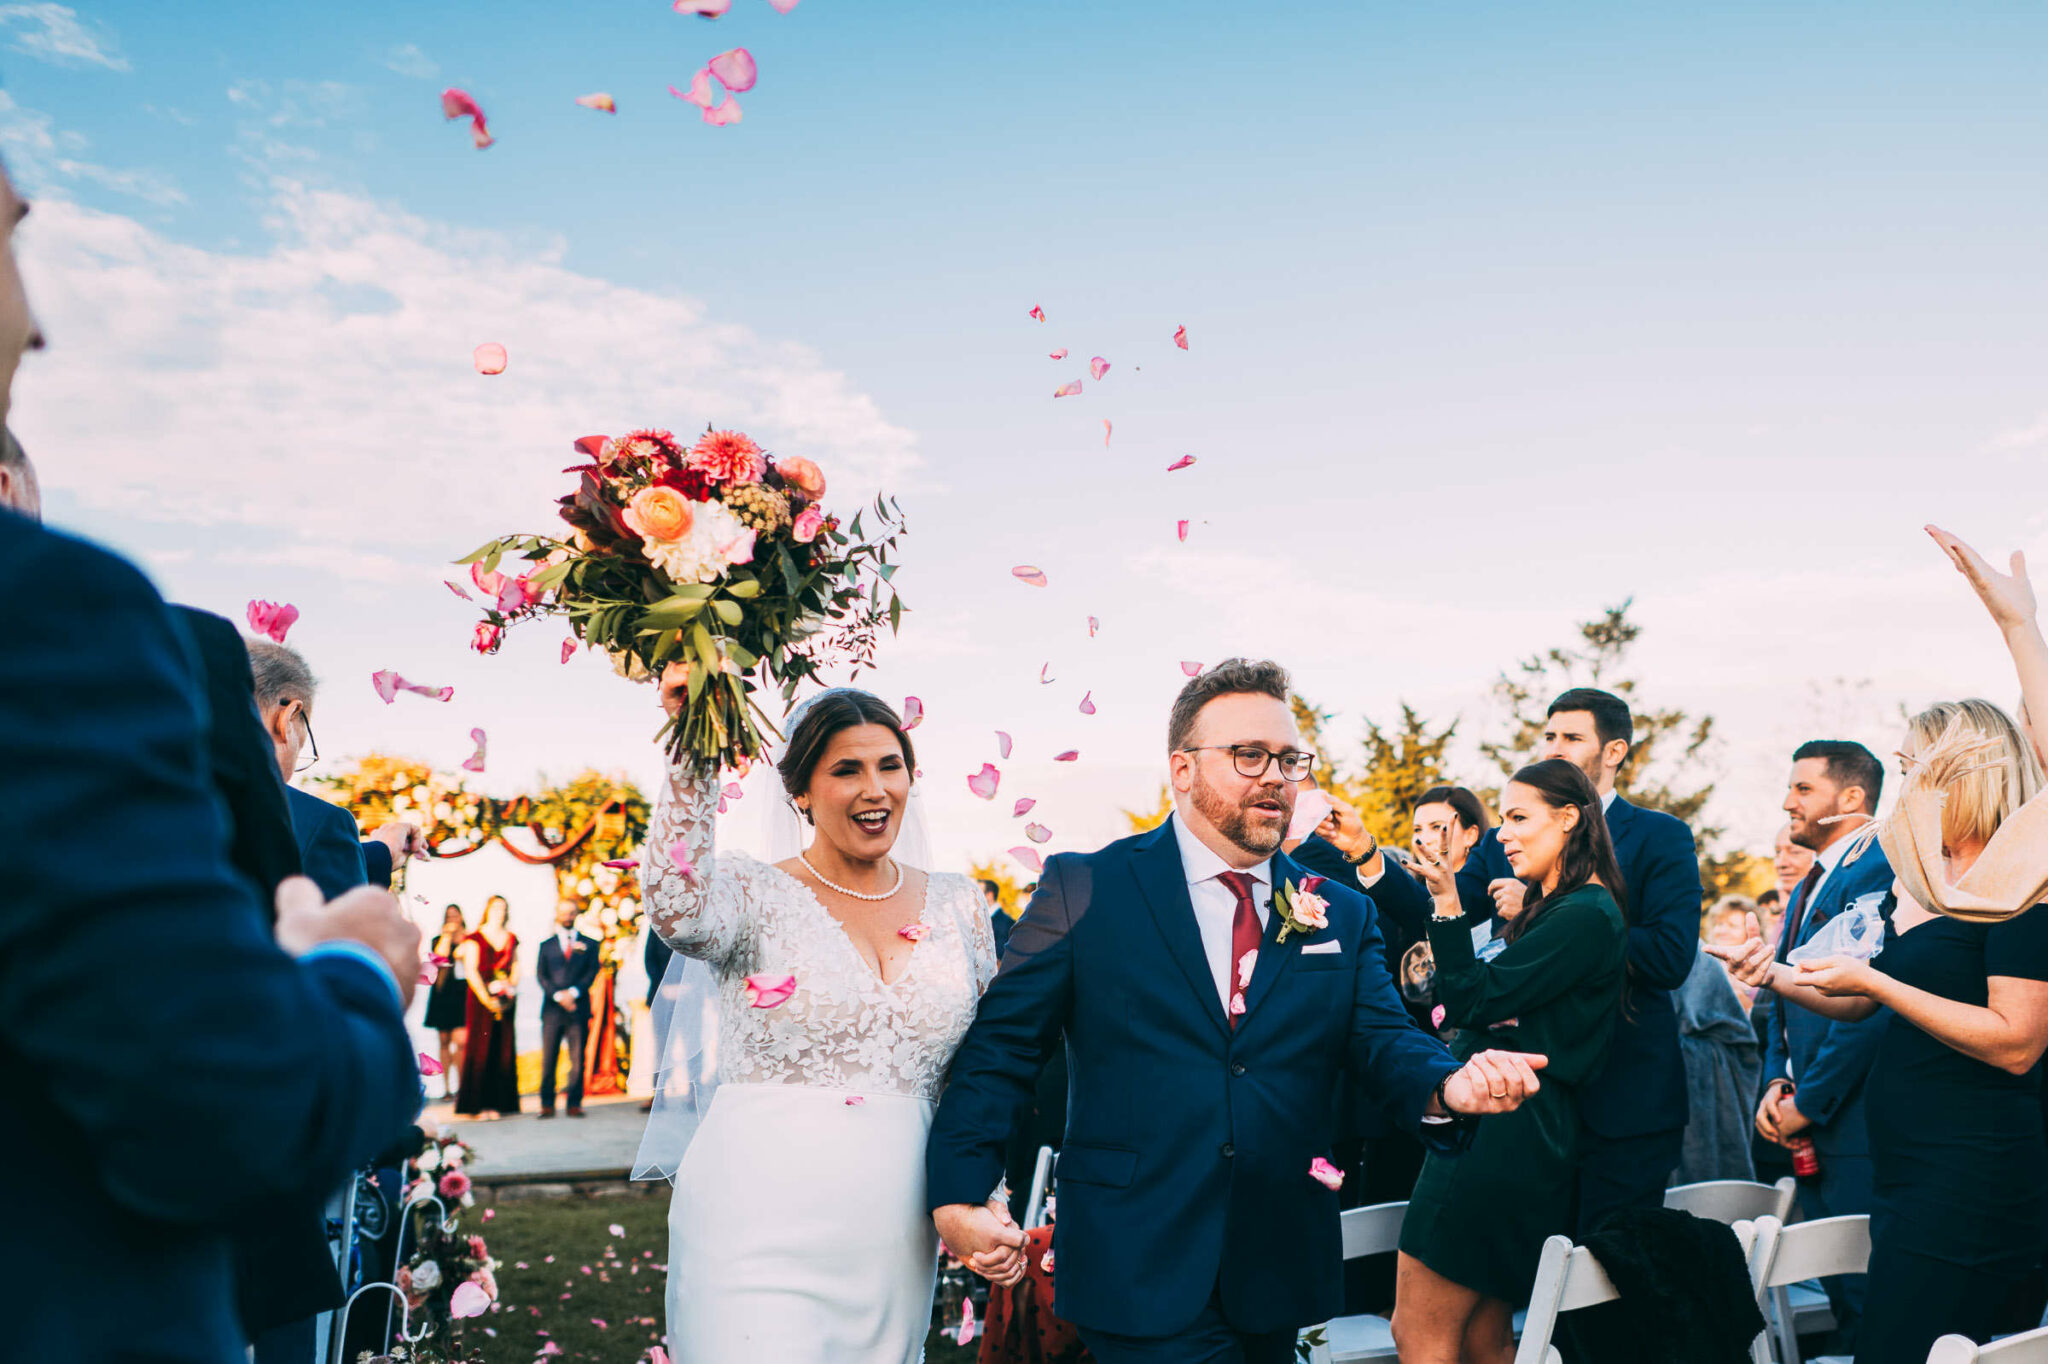 A bride and groom walk together as flower petals levitate above their heads as they exit the ceremony of their wedding at Castle Hill Inn in Newport, Rhode Island.